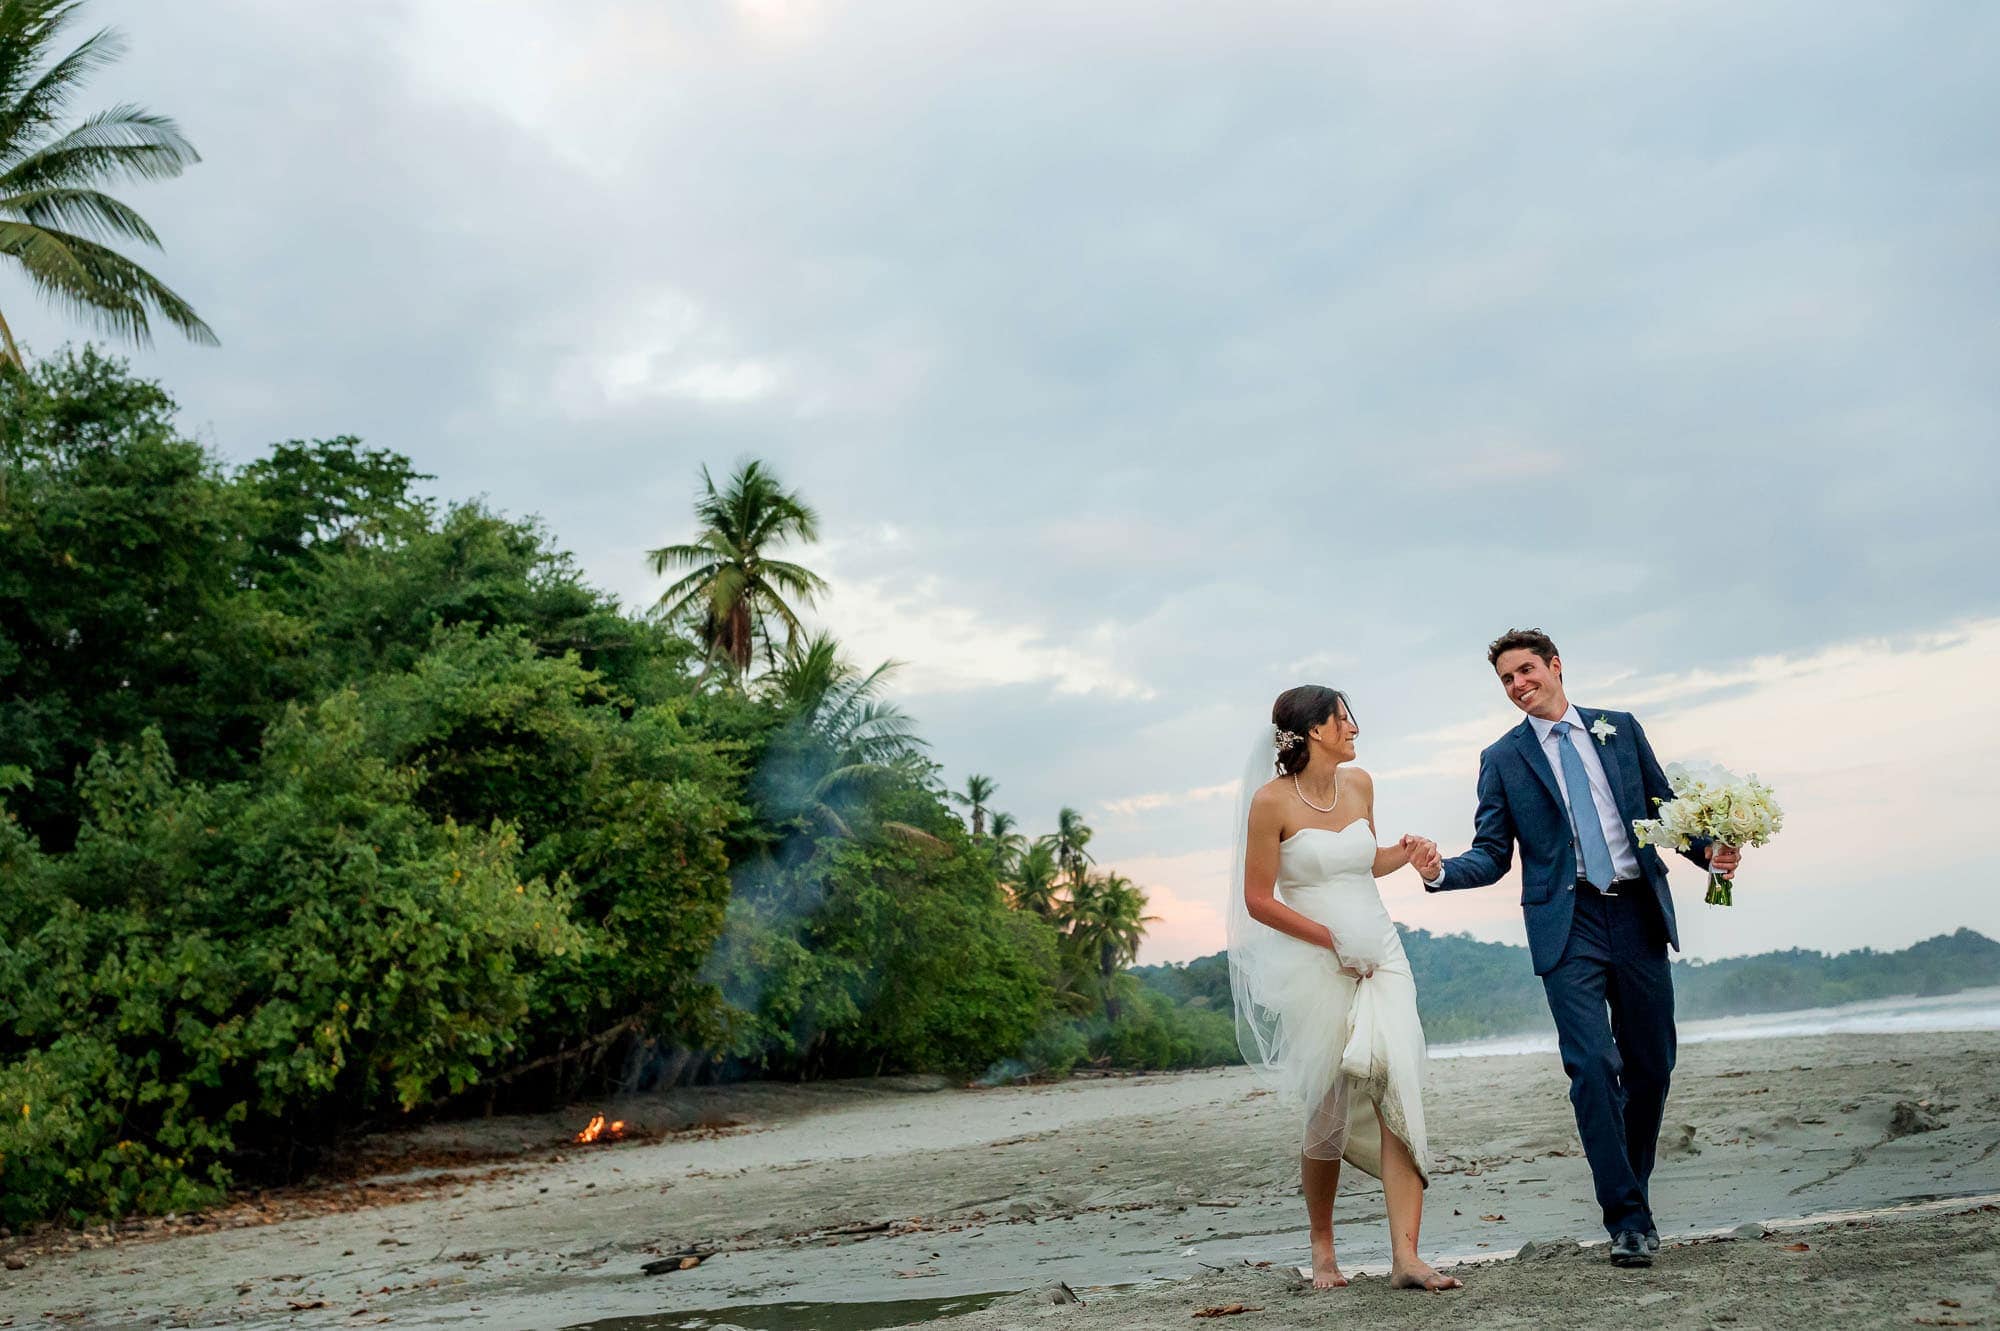 Getting married in Costa Rica means epic bridal portraits!